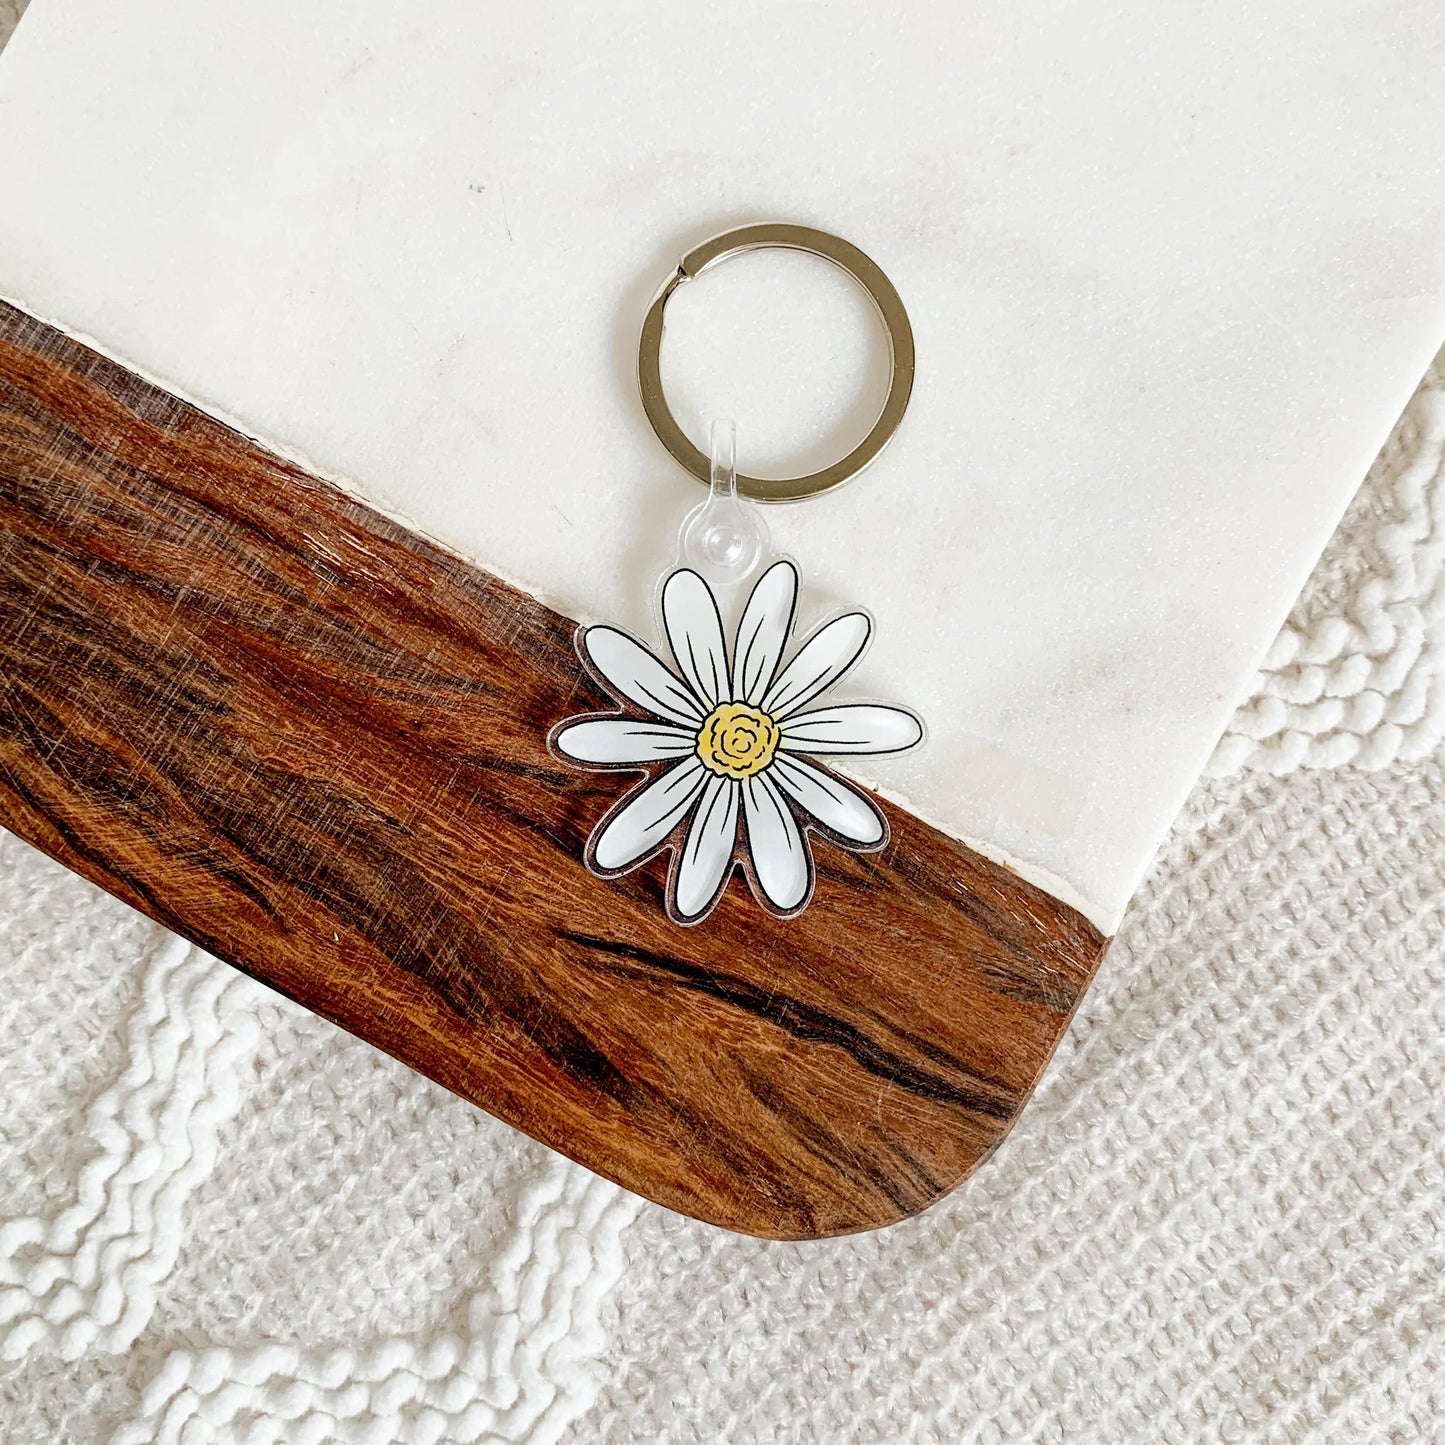 Load image into Gallery viewer, Daisy Keychain
